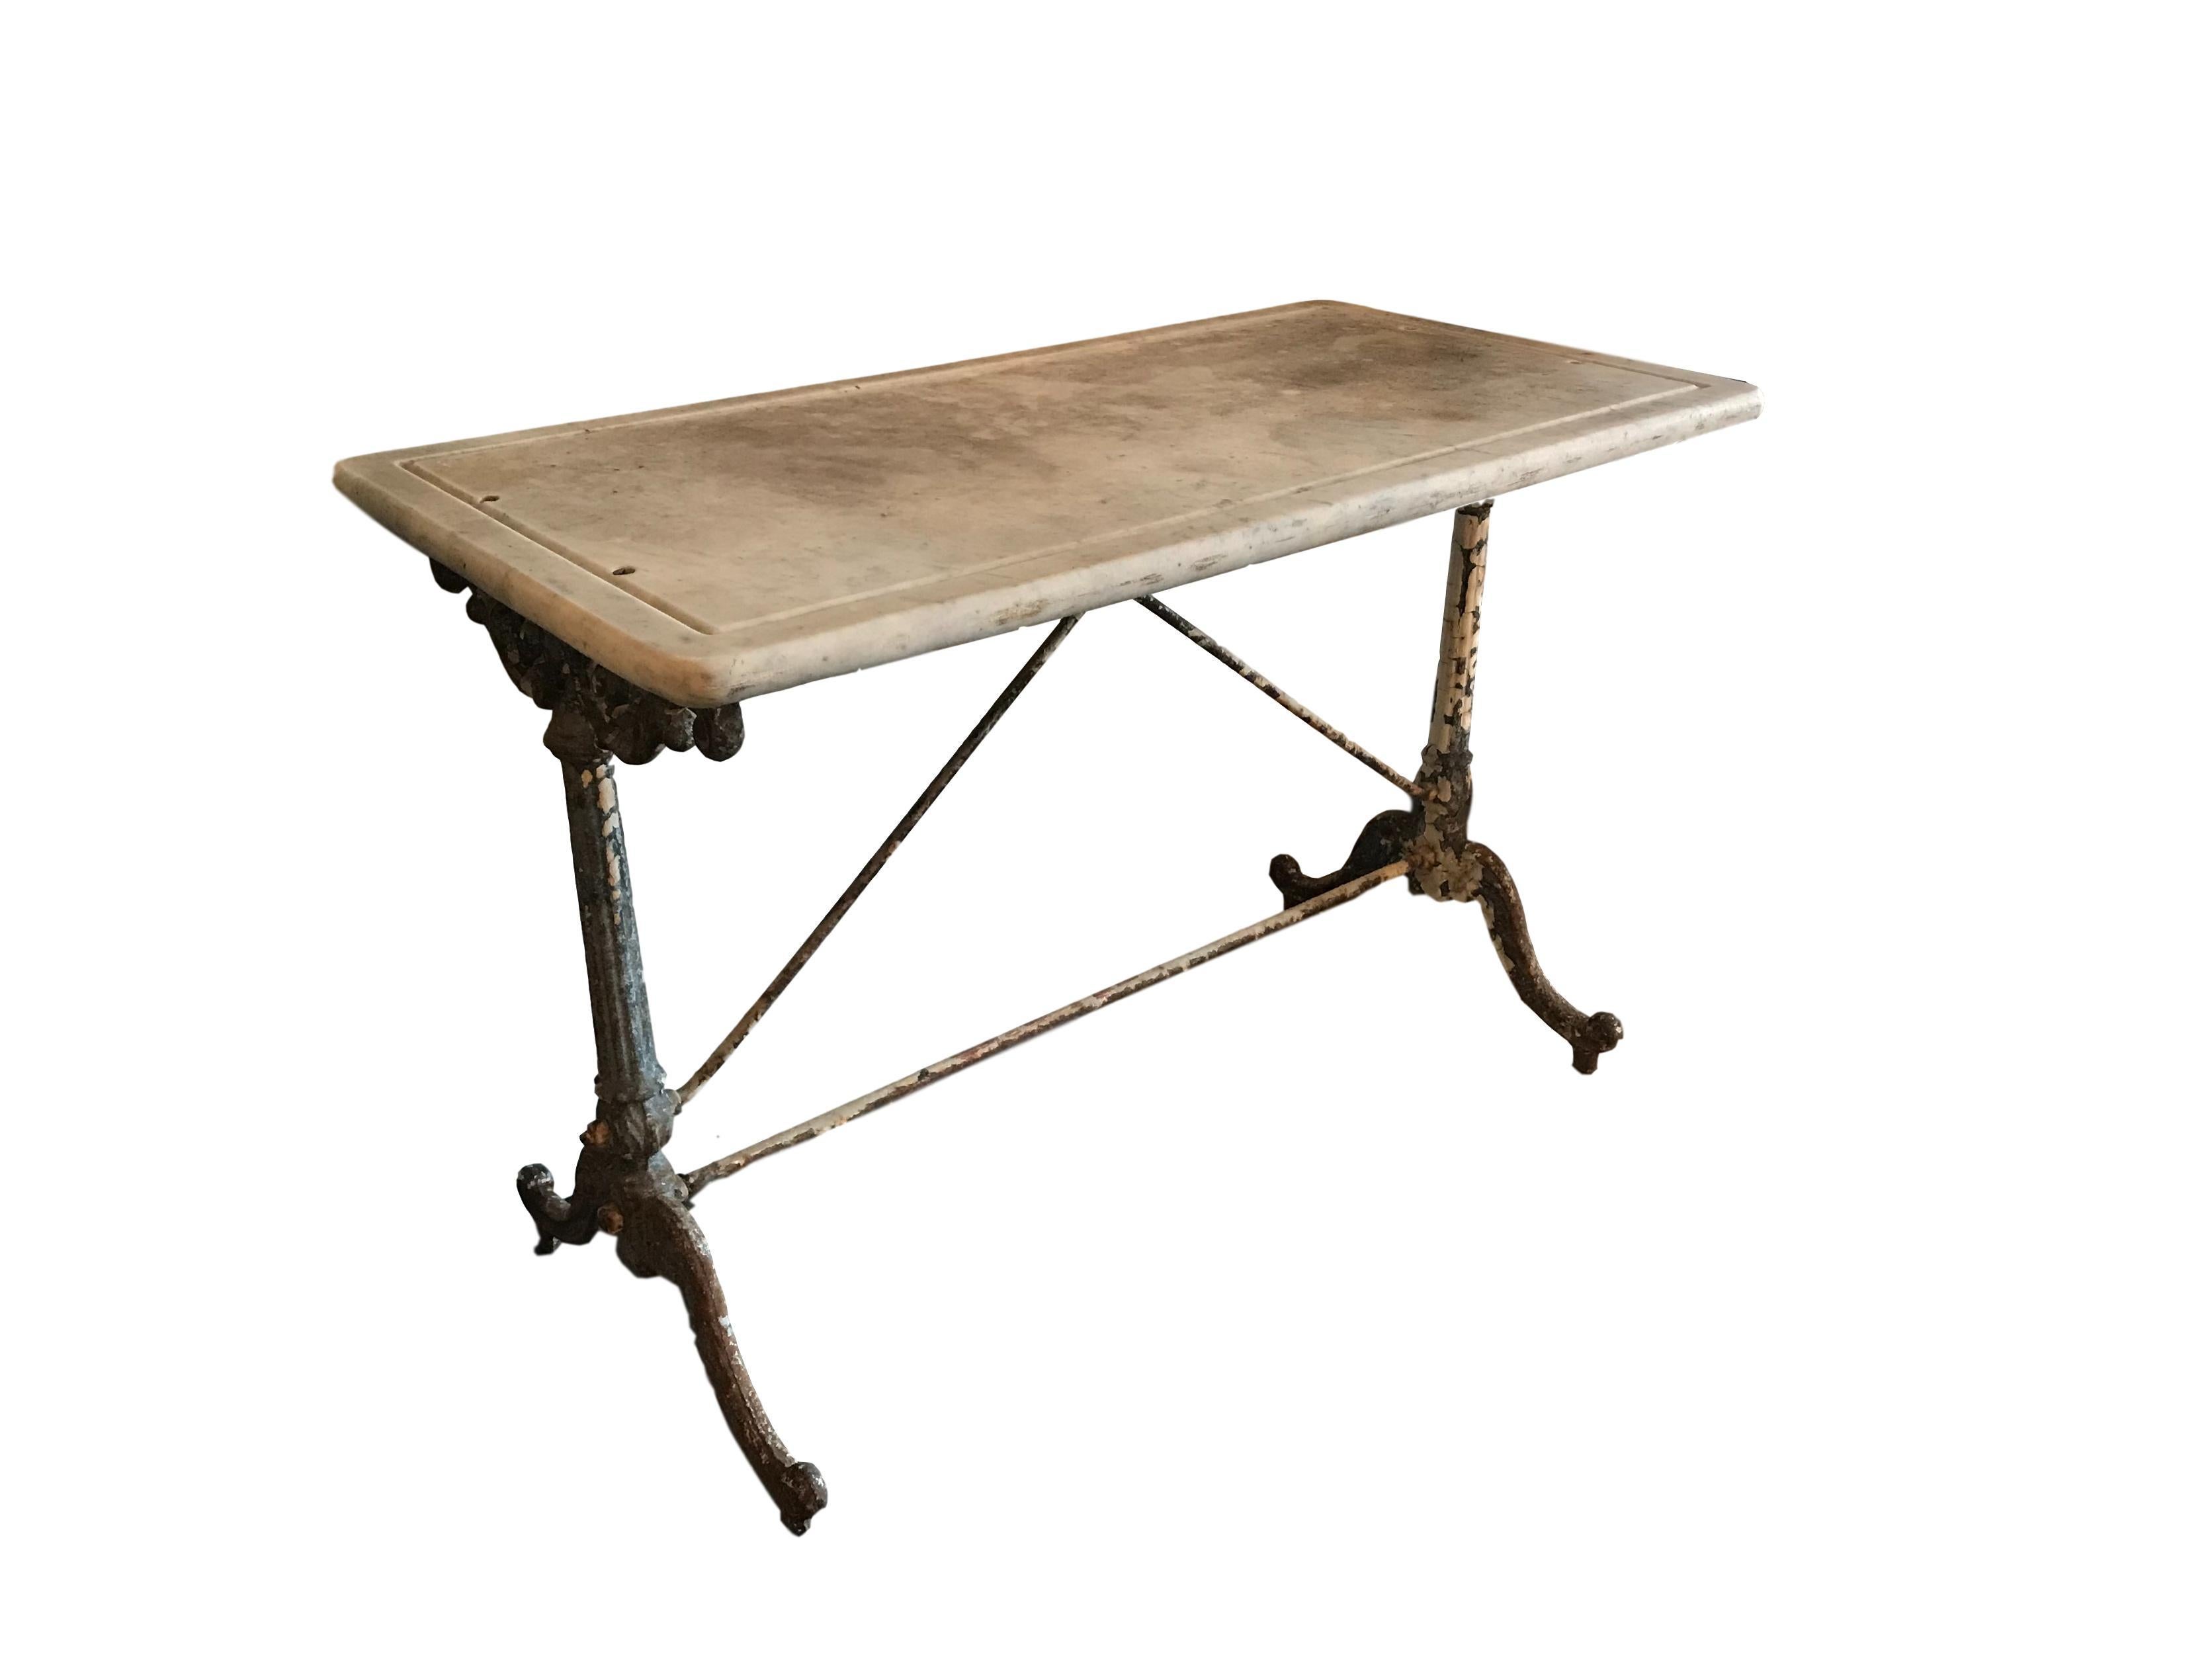 This is a lovely 19th century wrought iron outdoor garden table with its original marble top from France.